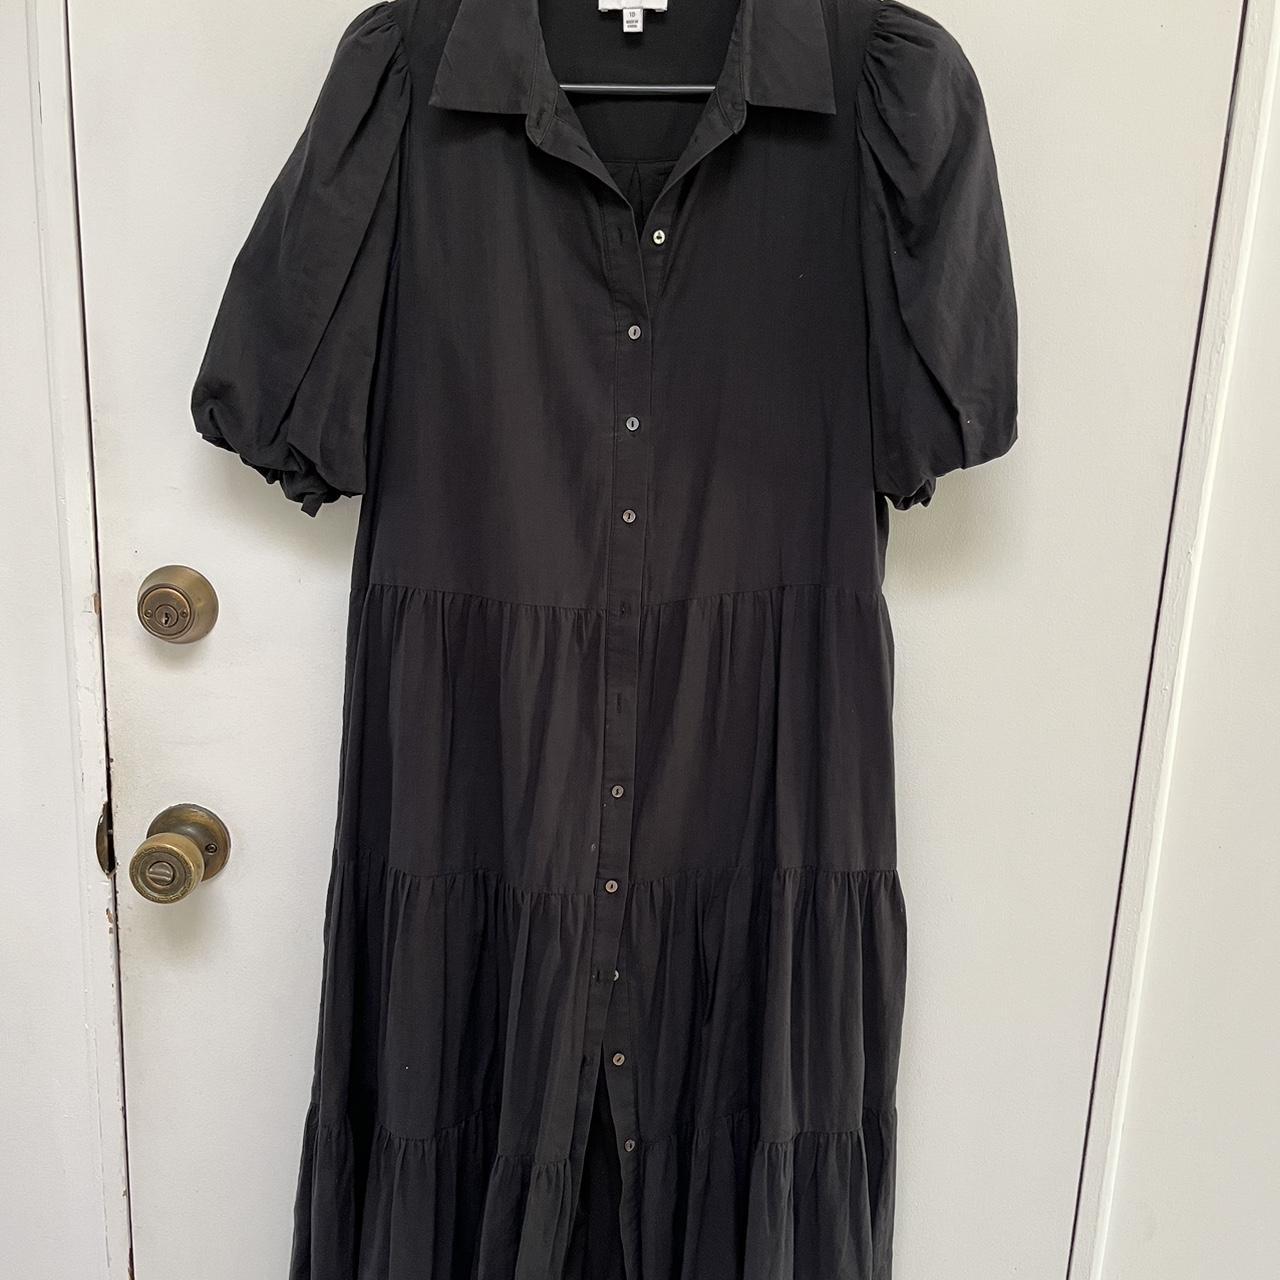 Witchery dress. Button up Size 10 Fully lined puff... - Depop